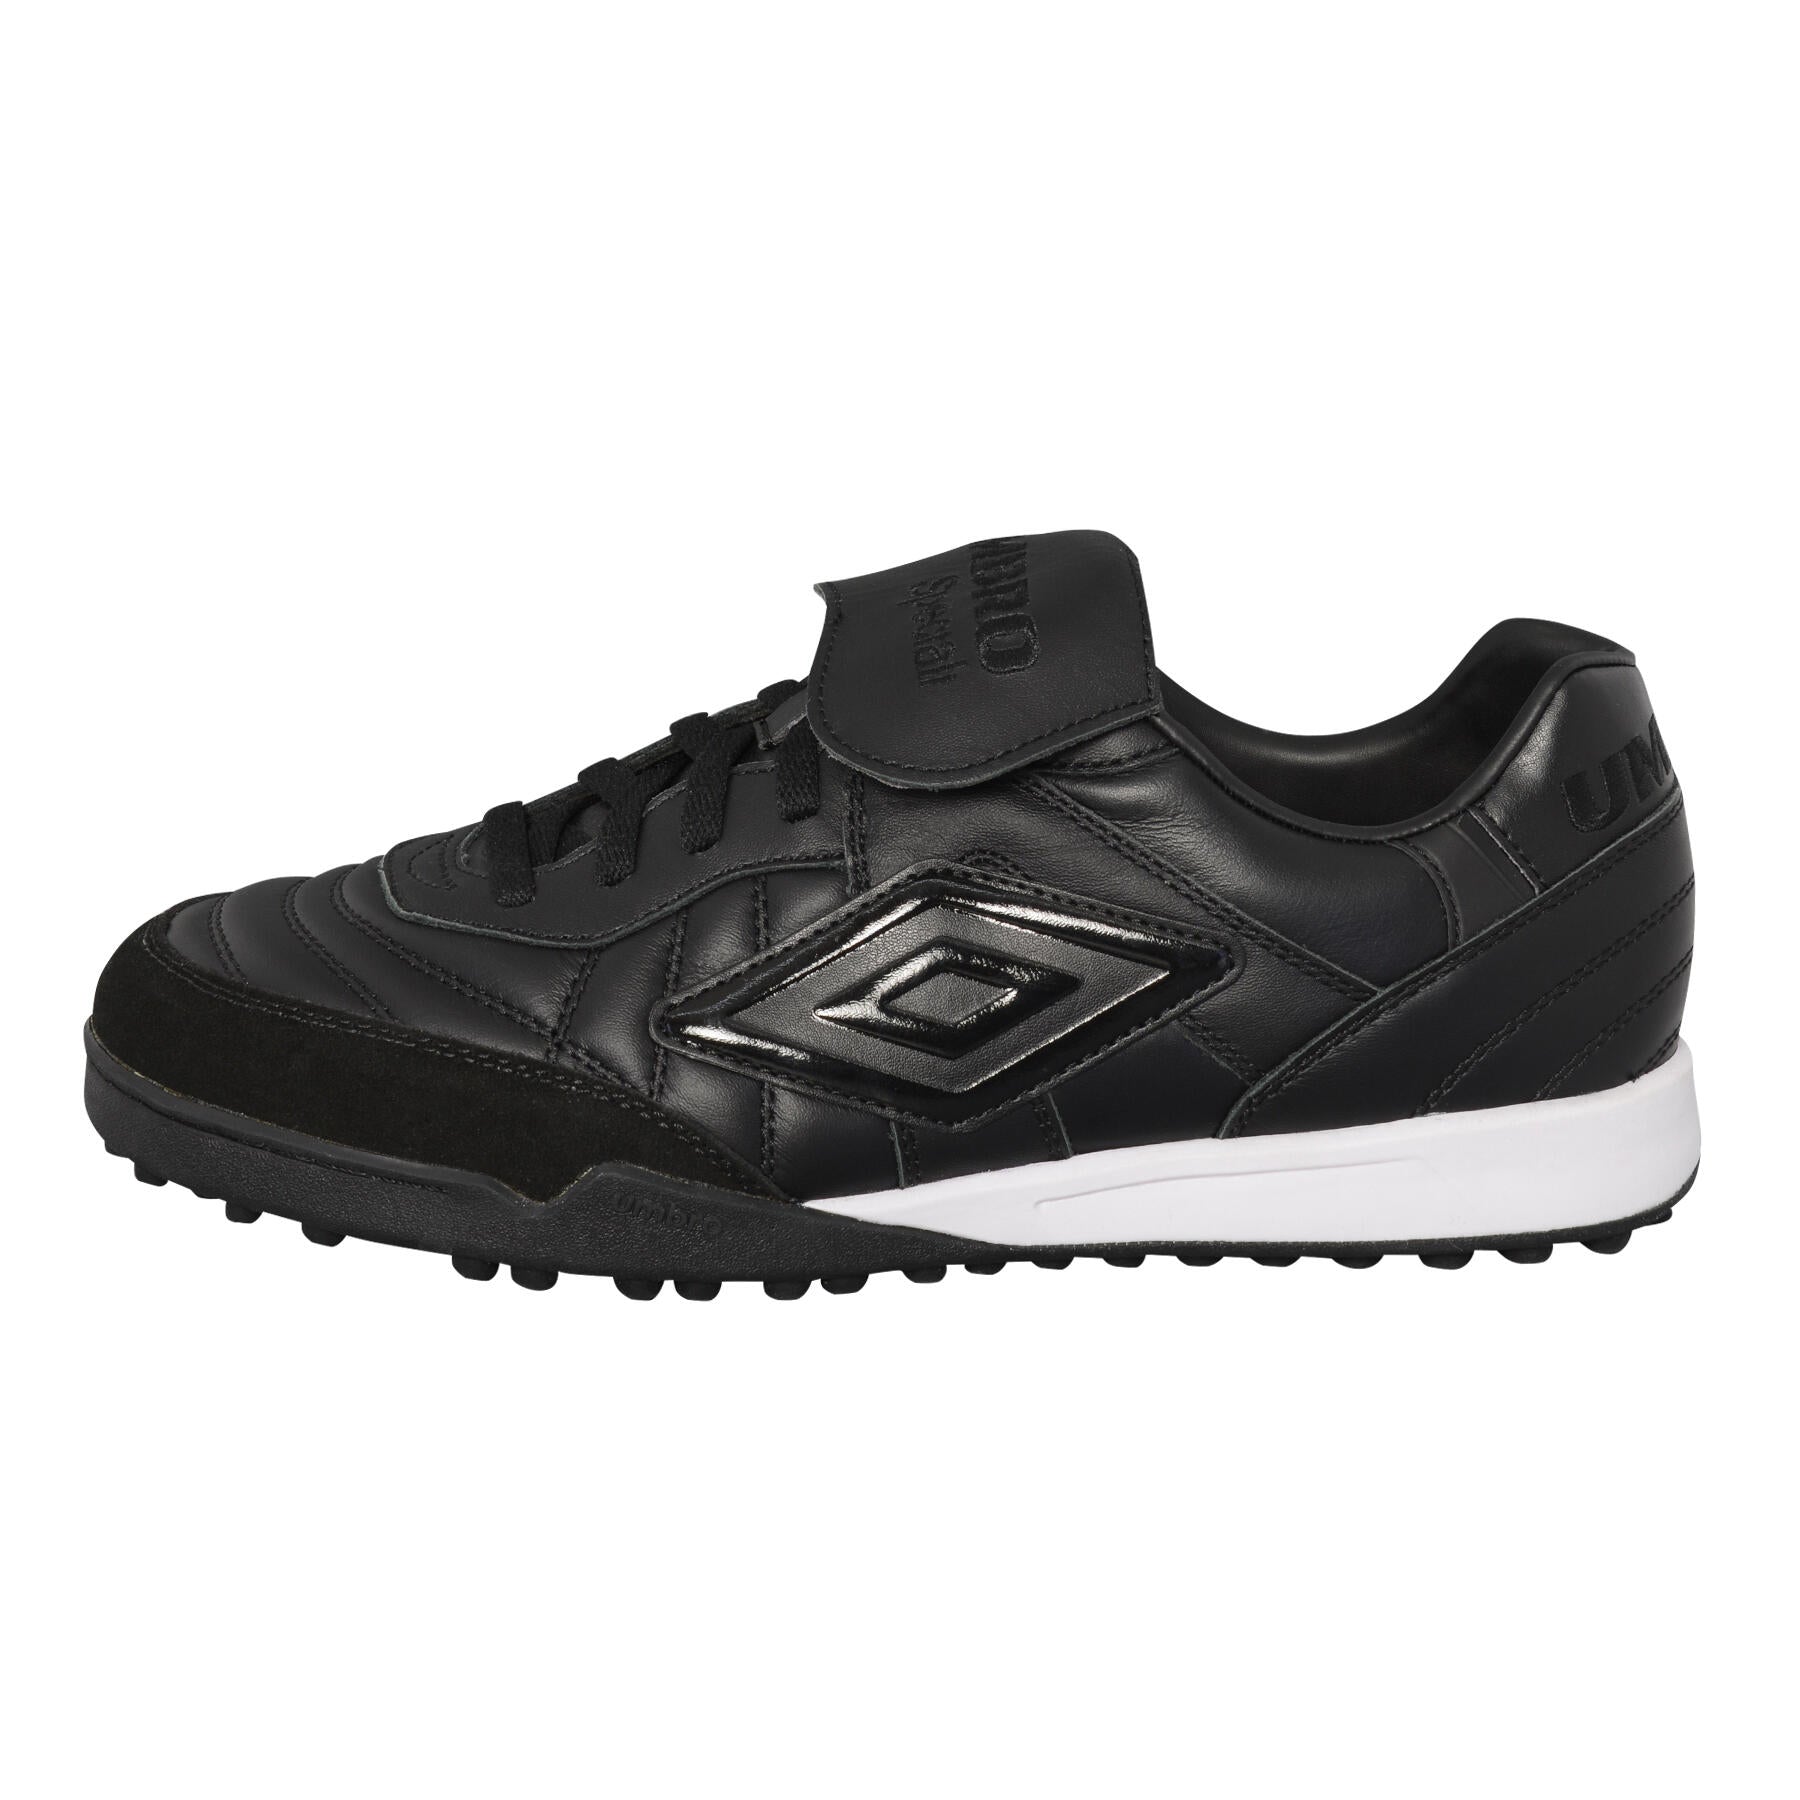 Umbro Speciali Pro 98 TF Men's Turf Shoes | Source for Sports